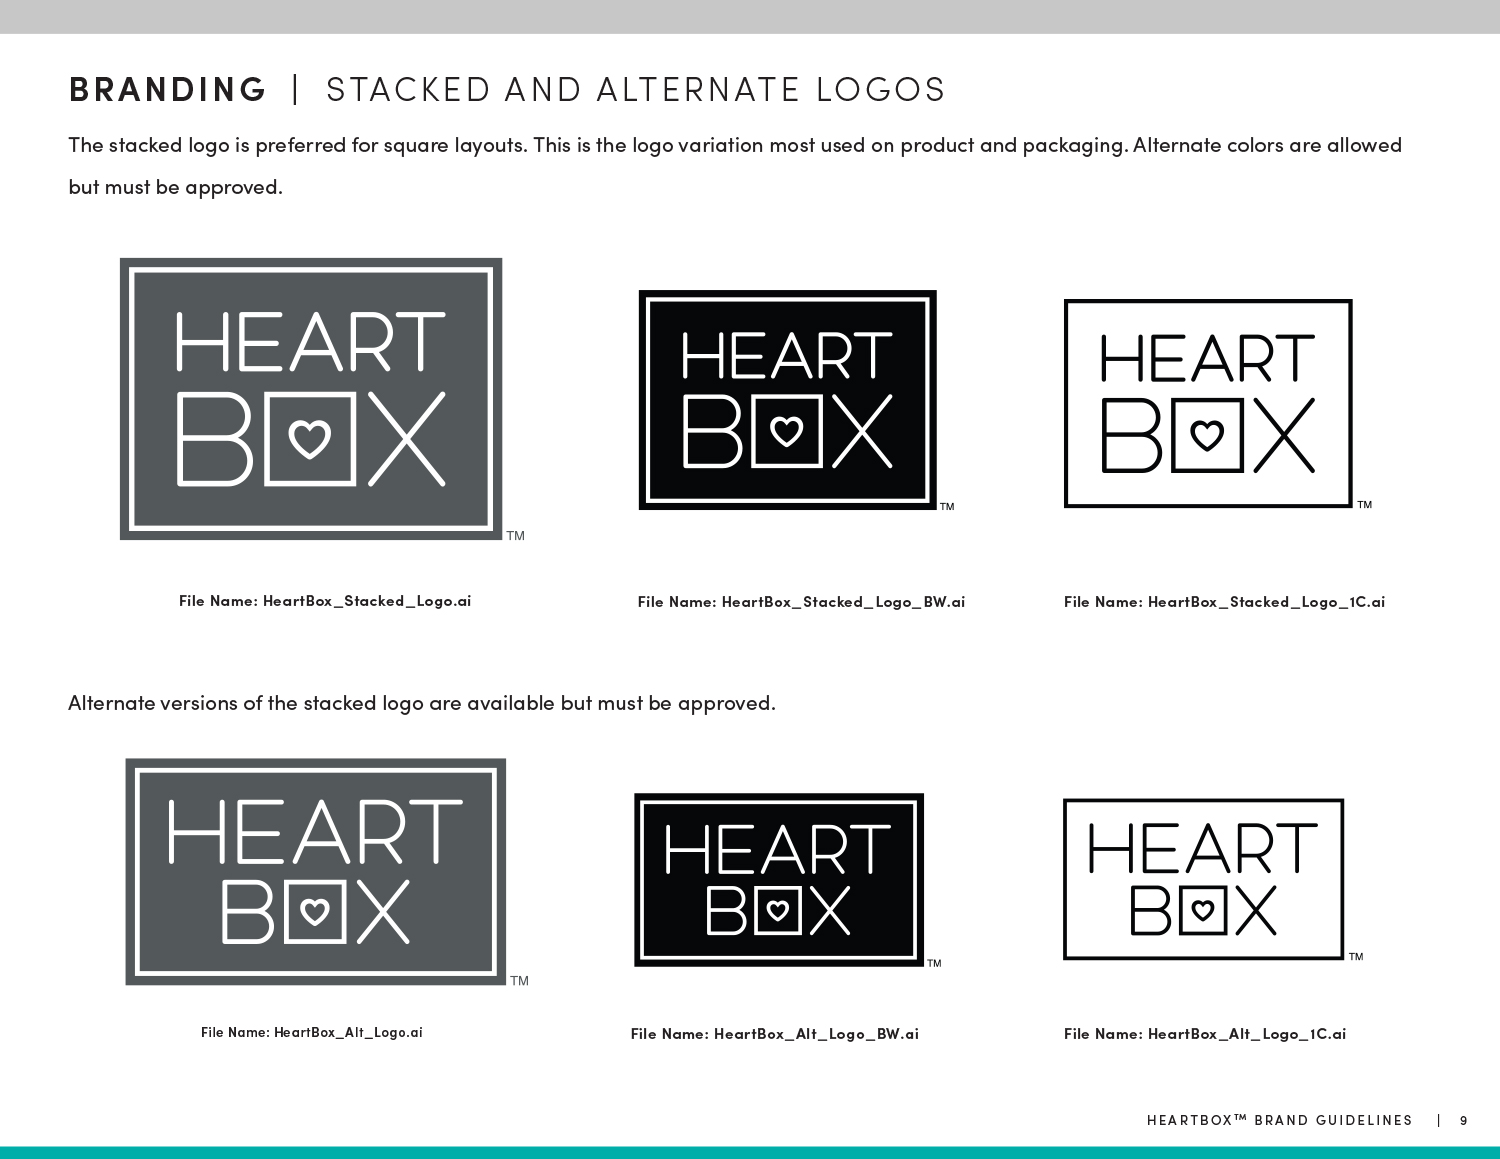 HeartBox Marketing Design Stacked and Alternate Logos